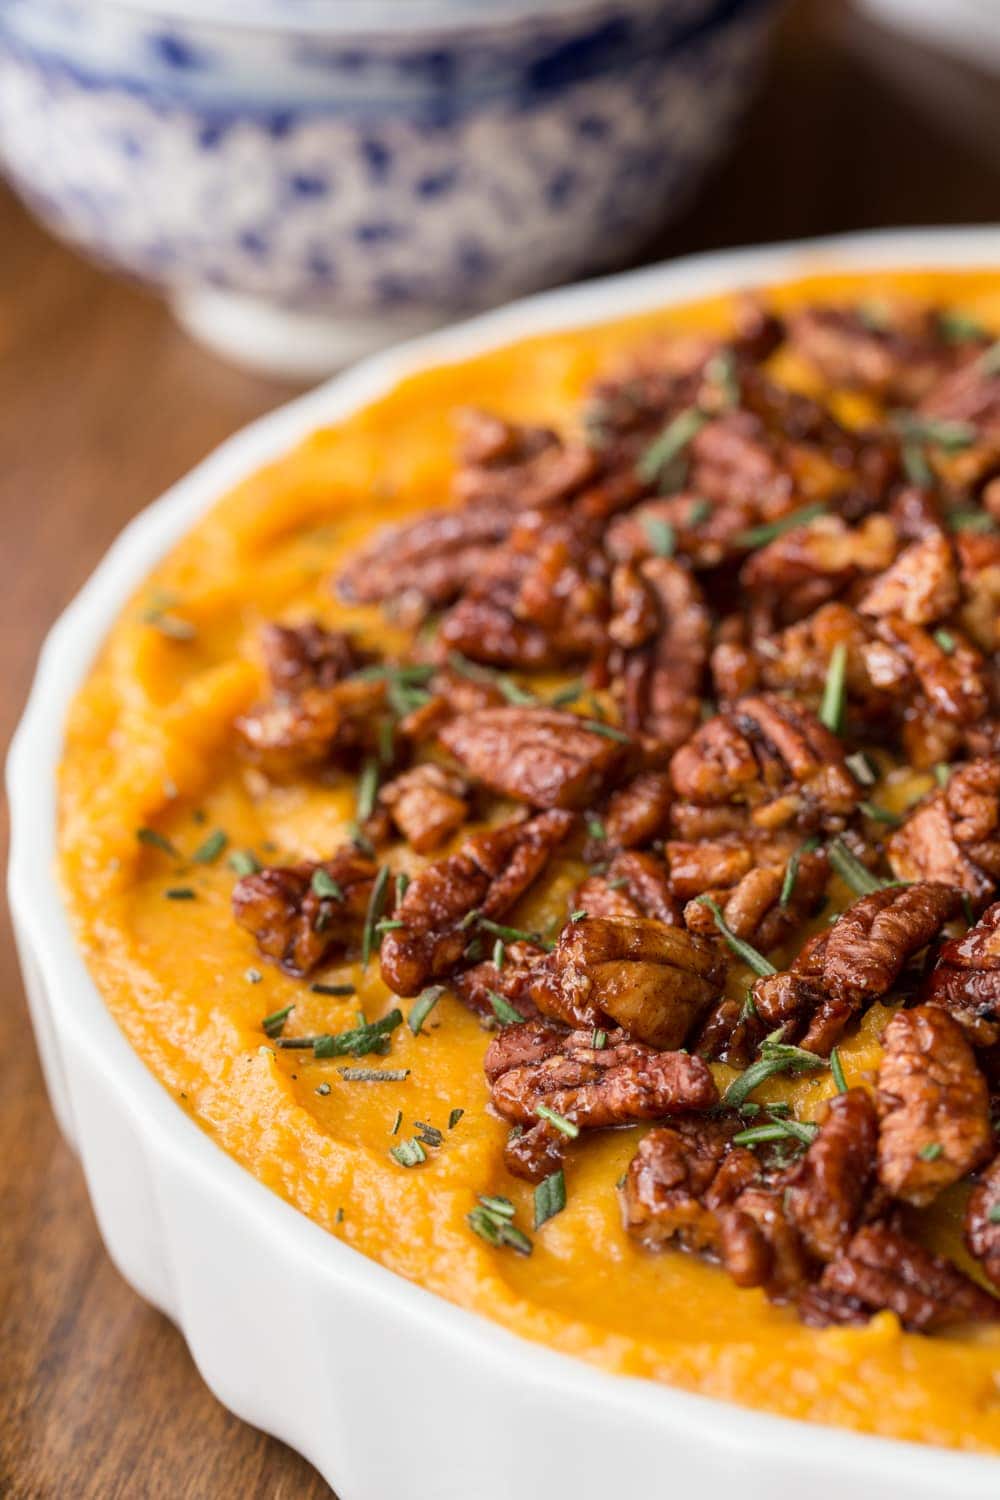 Combining sweet potatoes, butternut squash, maple syrup and a pinch of cinnamon and curry, this healthy sweet potato casserole wows everyone!